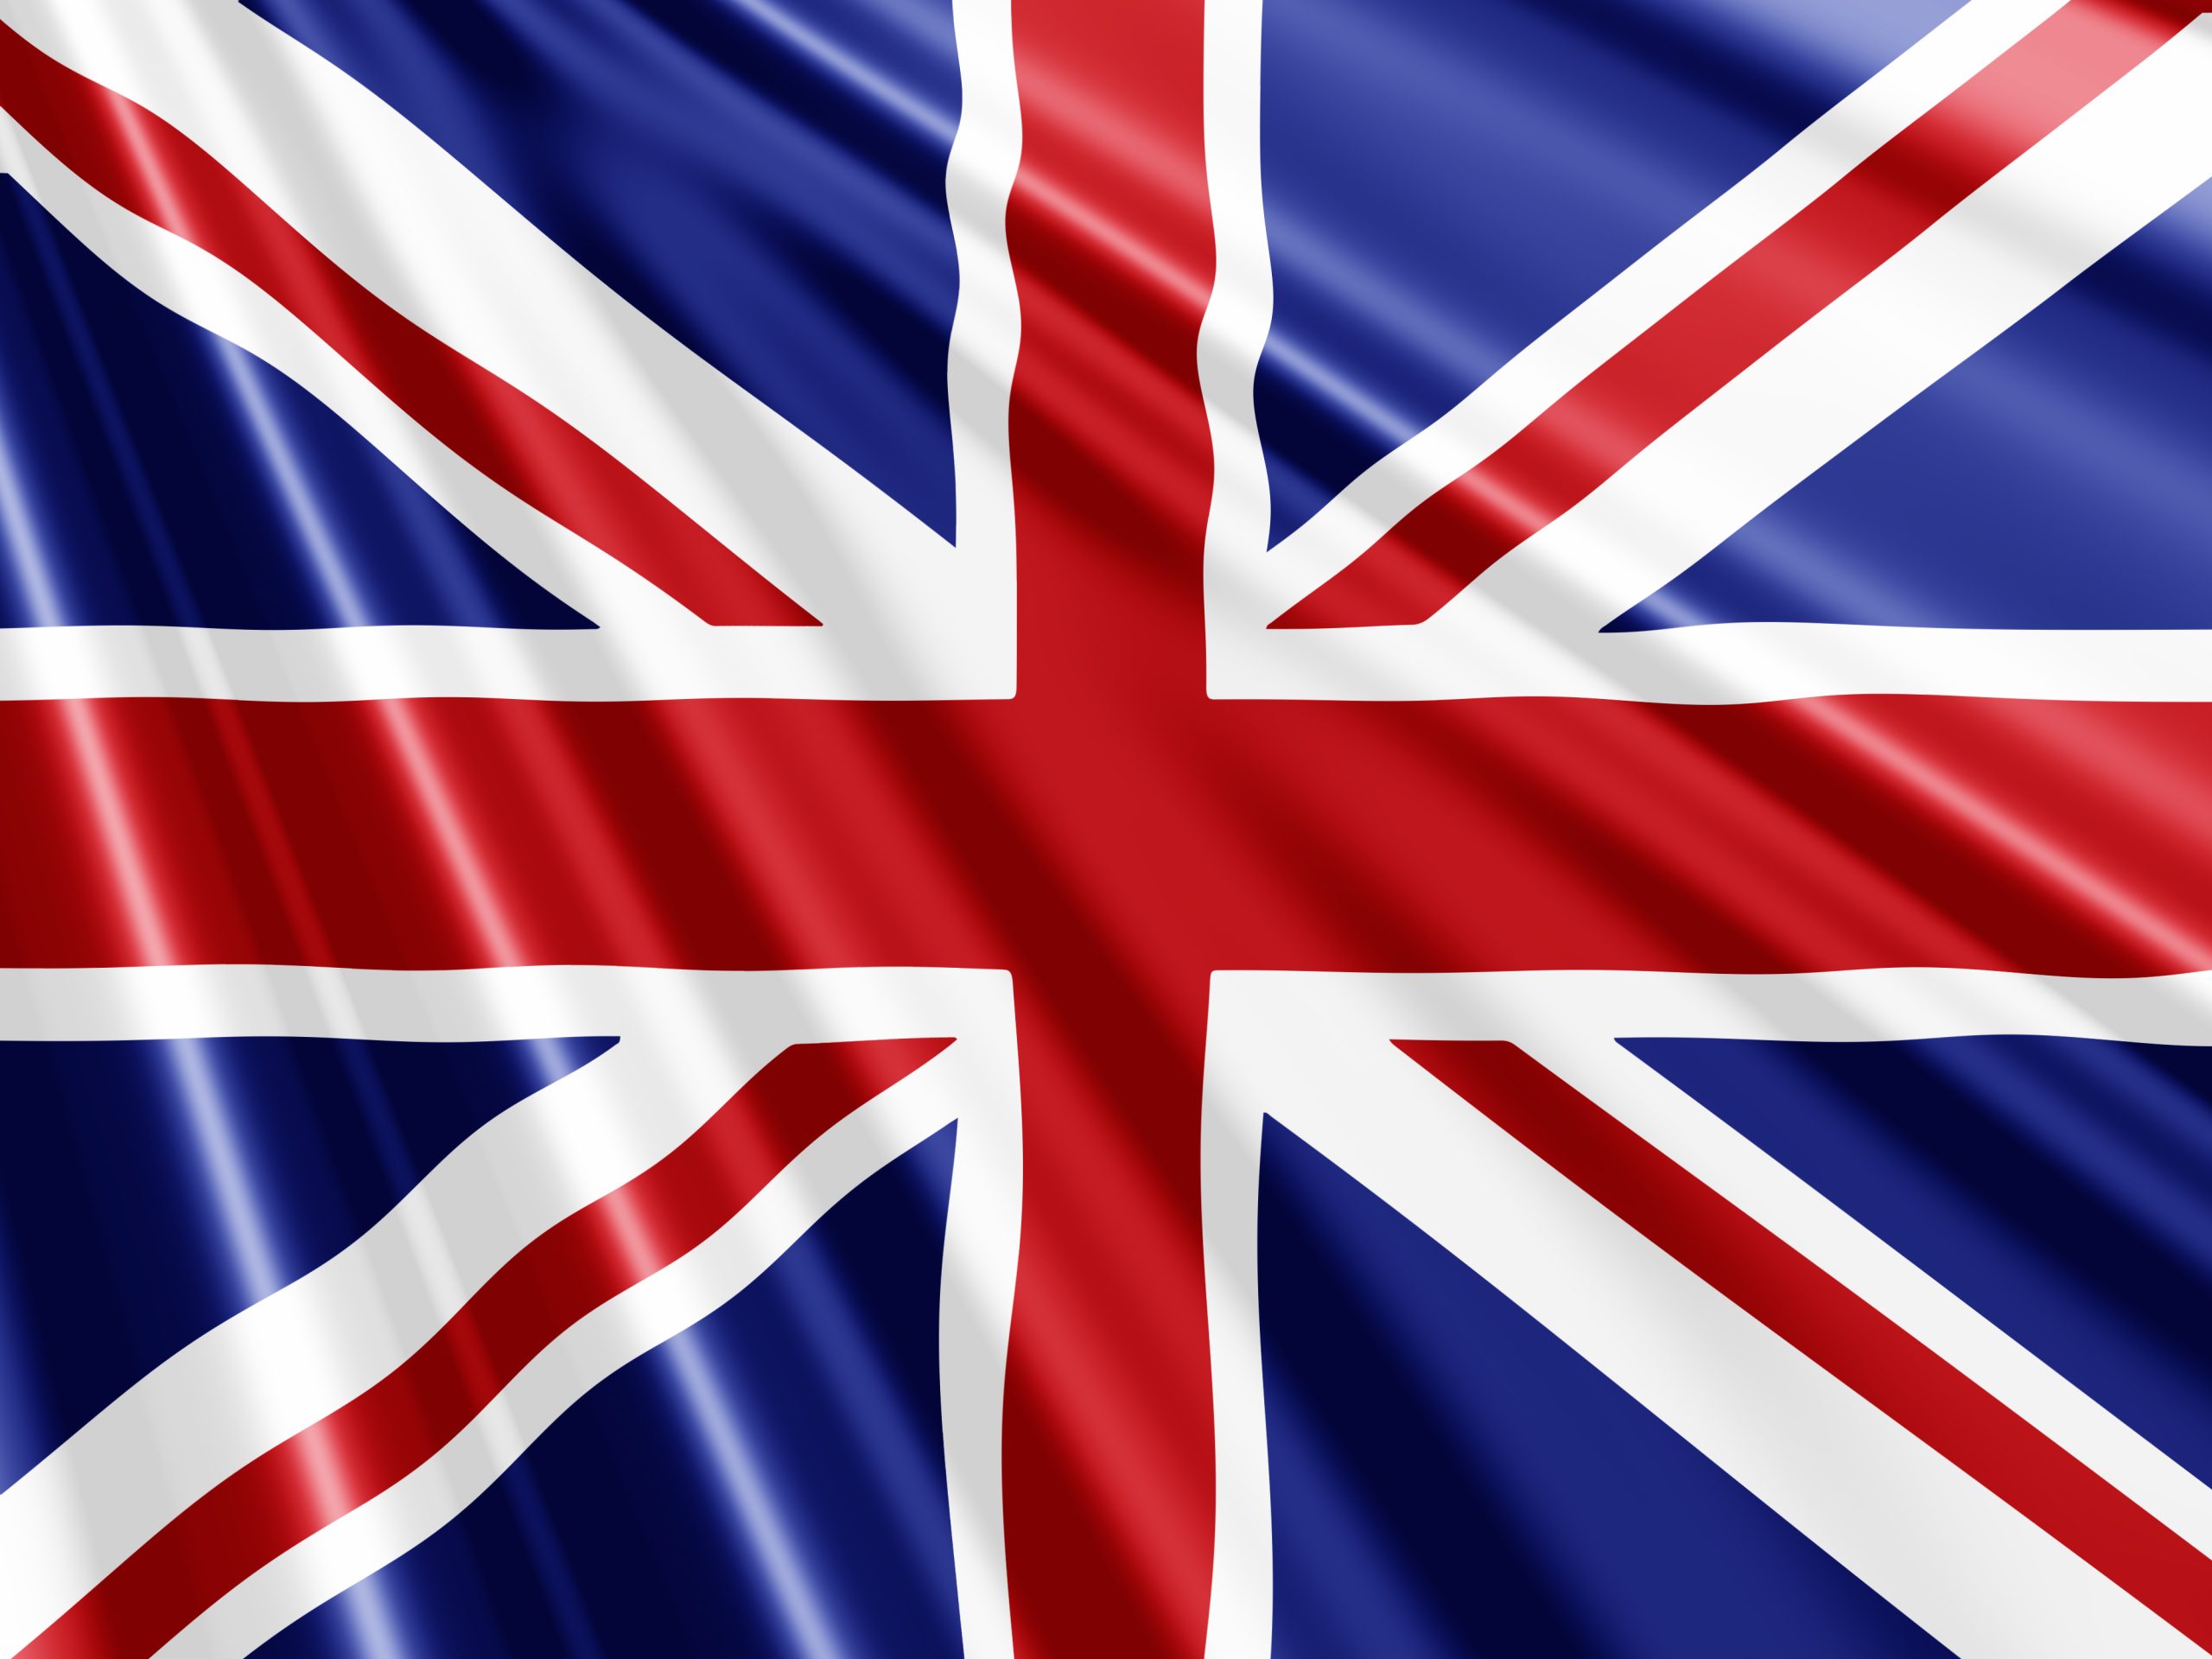 Union Jack Flag background - ideal for the Queens Jubilee